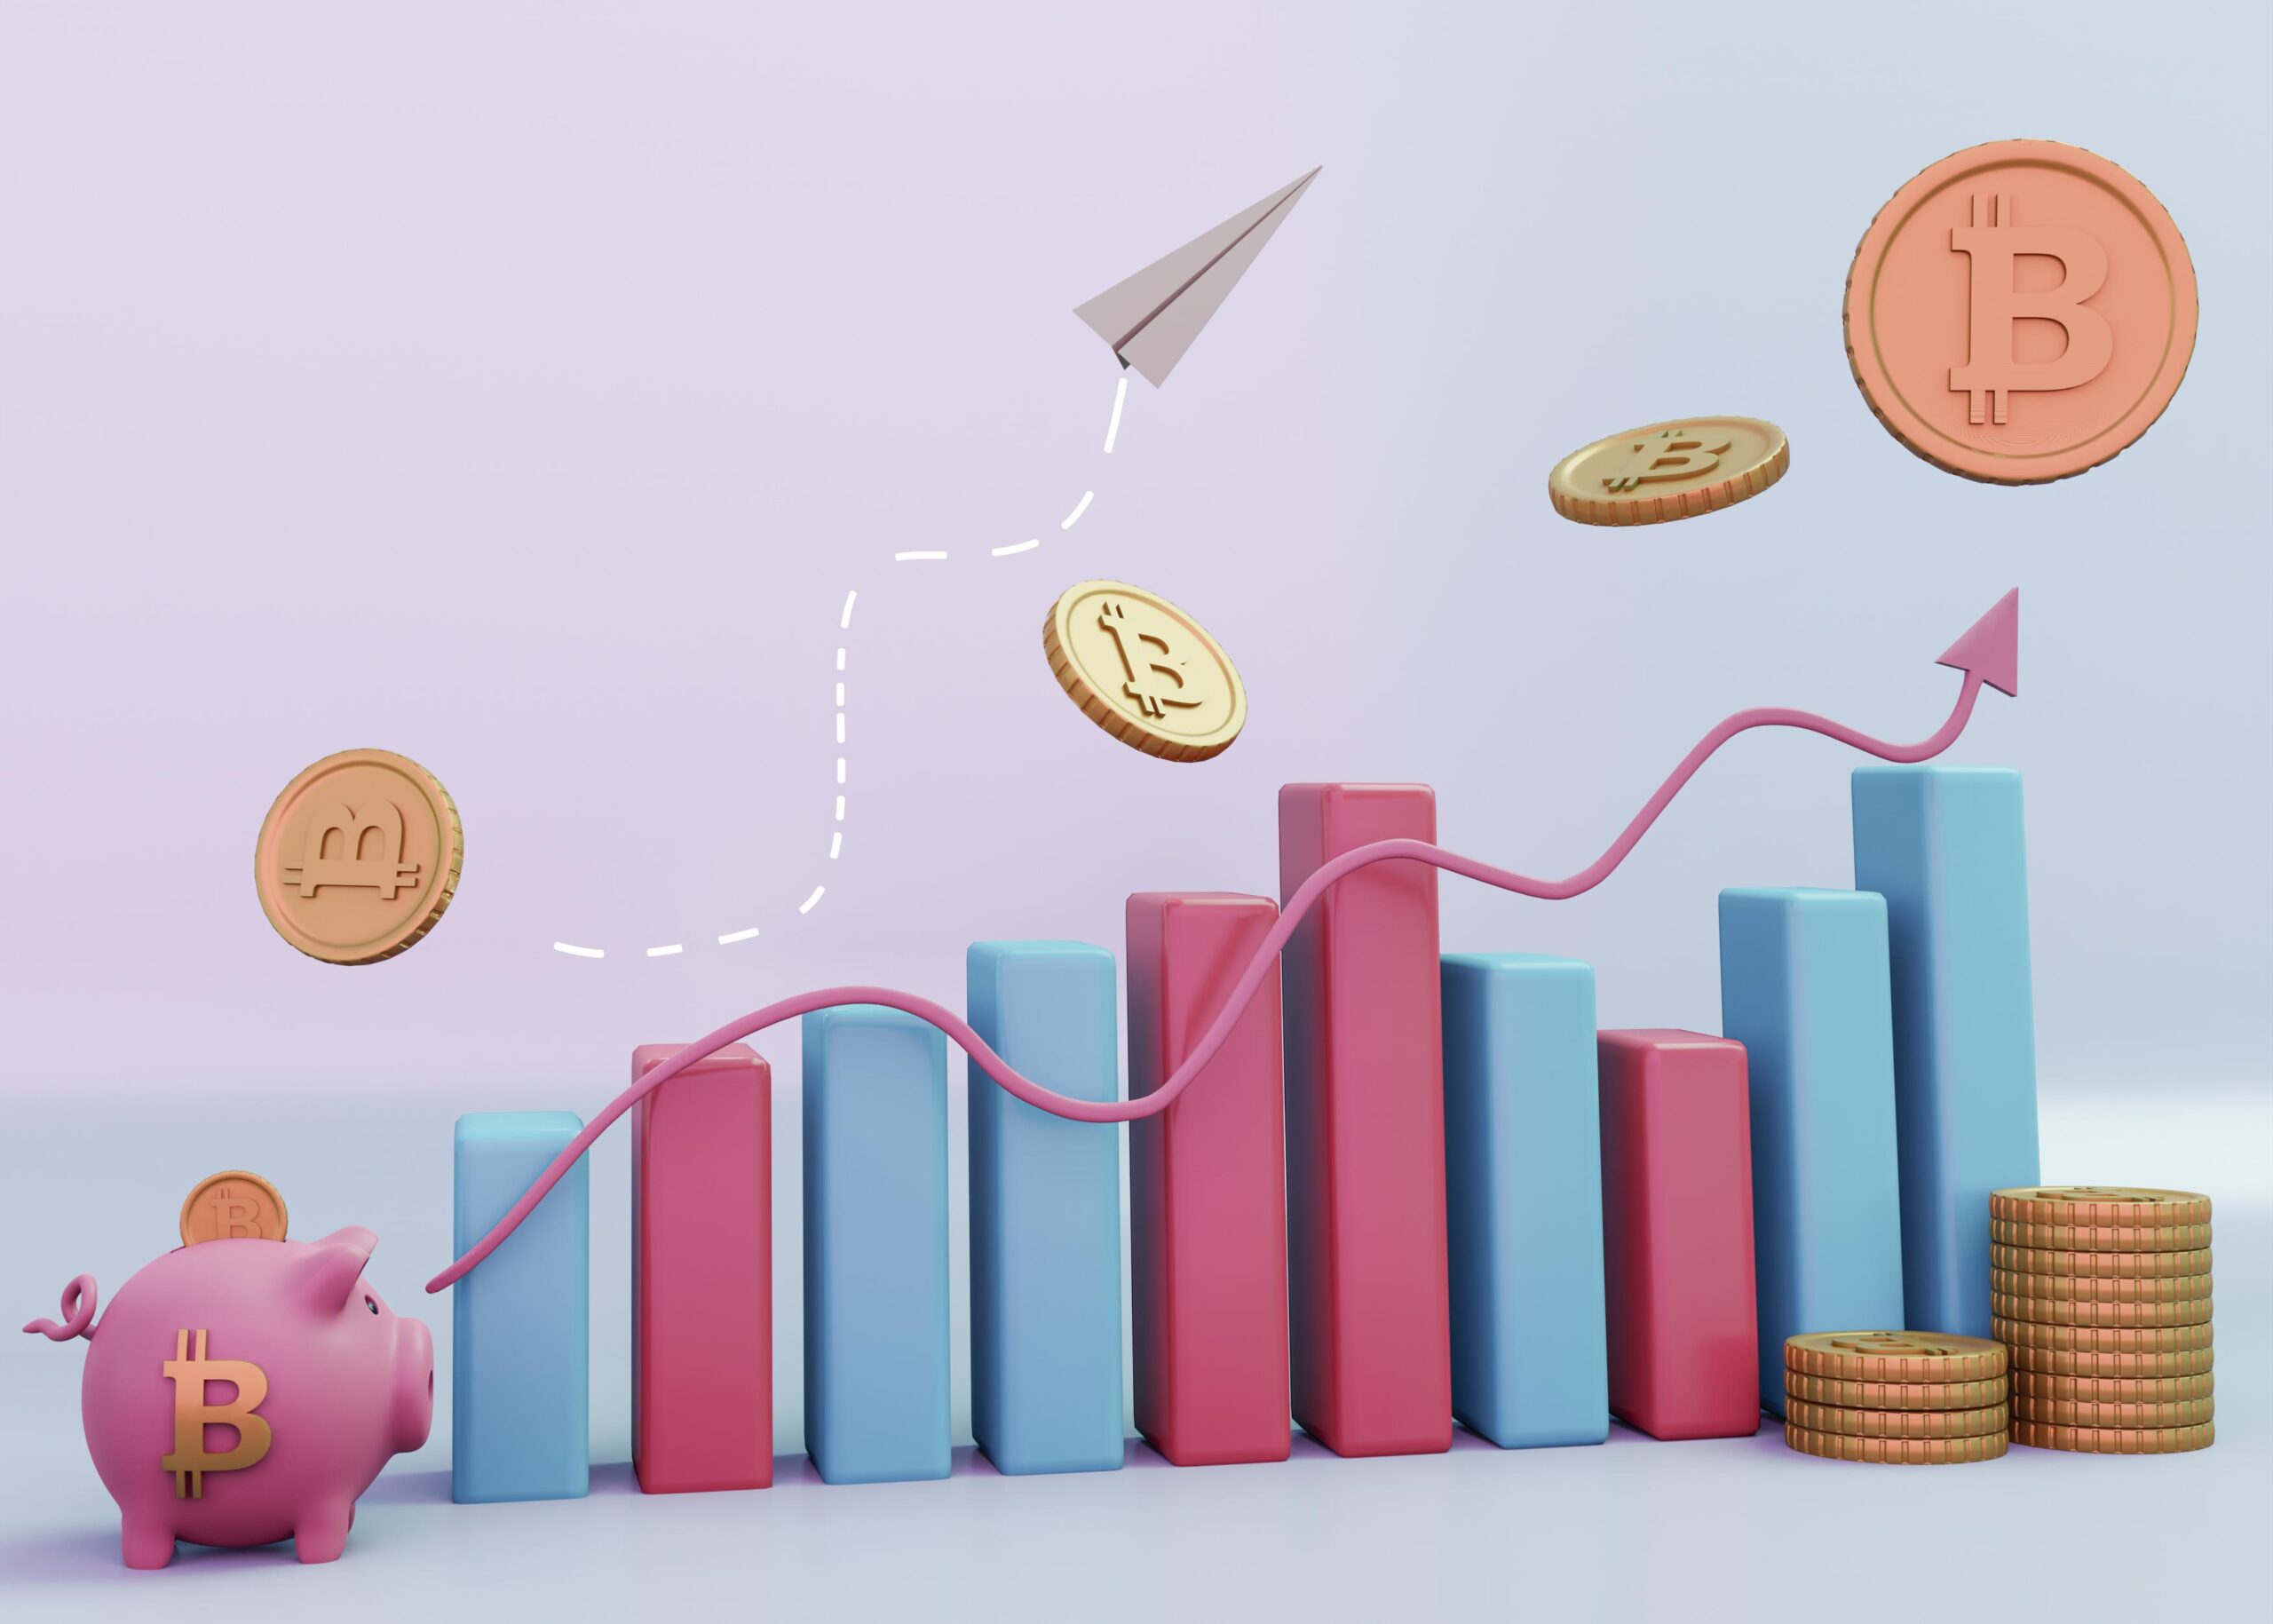 3D signifying a rise in bitcoin investment